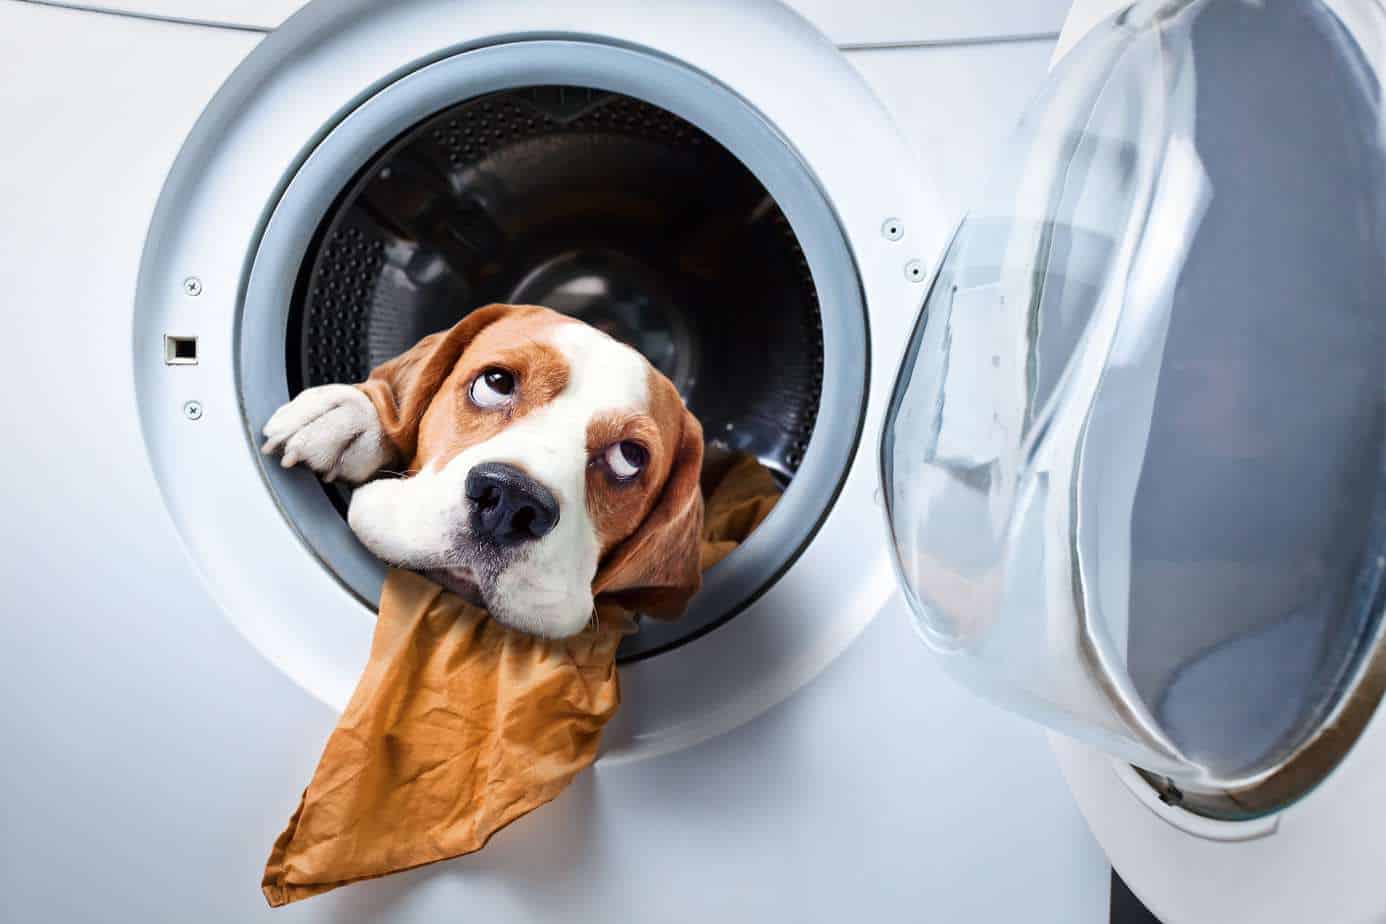 whimsical image of dog in washing machine. remove pet odor by regularly washing pet beds